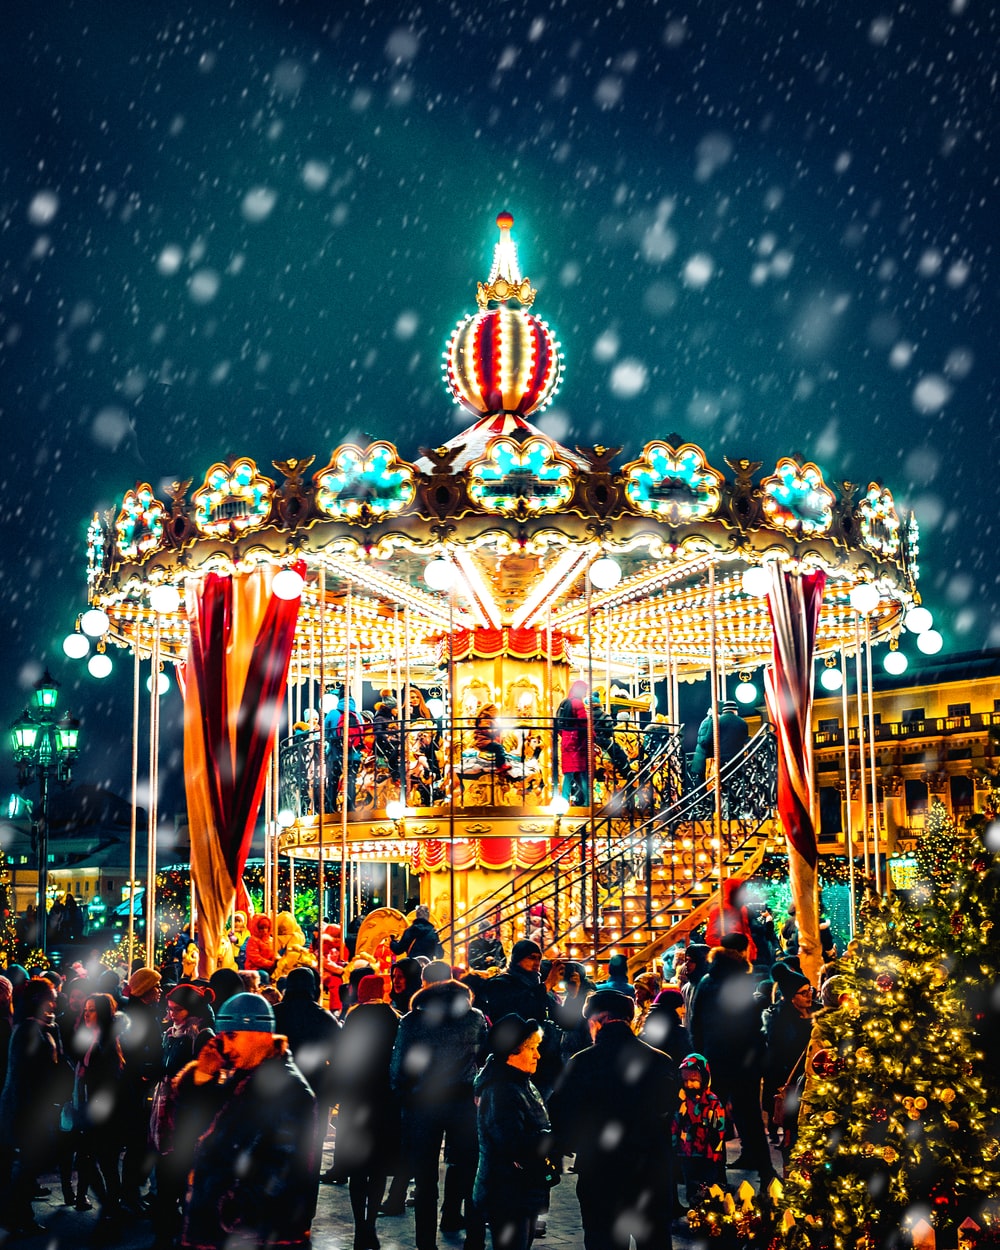 Carousel With Snow Pouring Down Photo Person Image